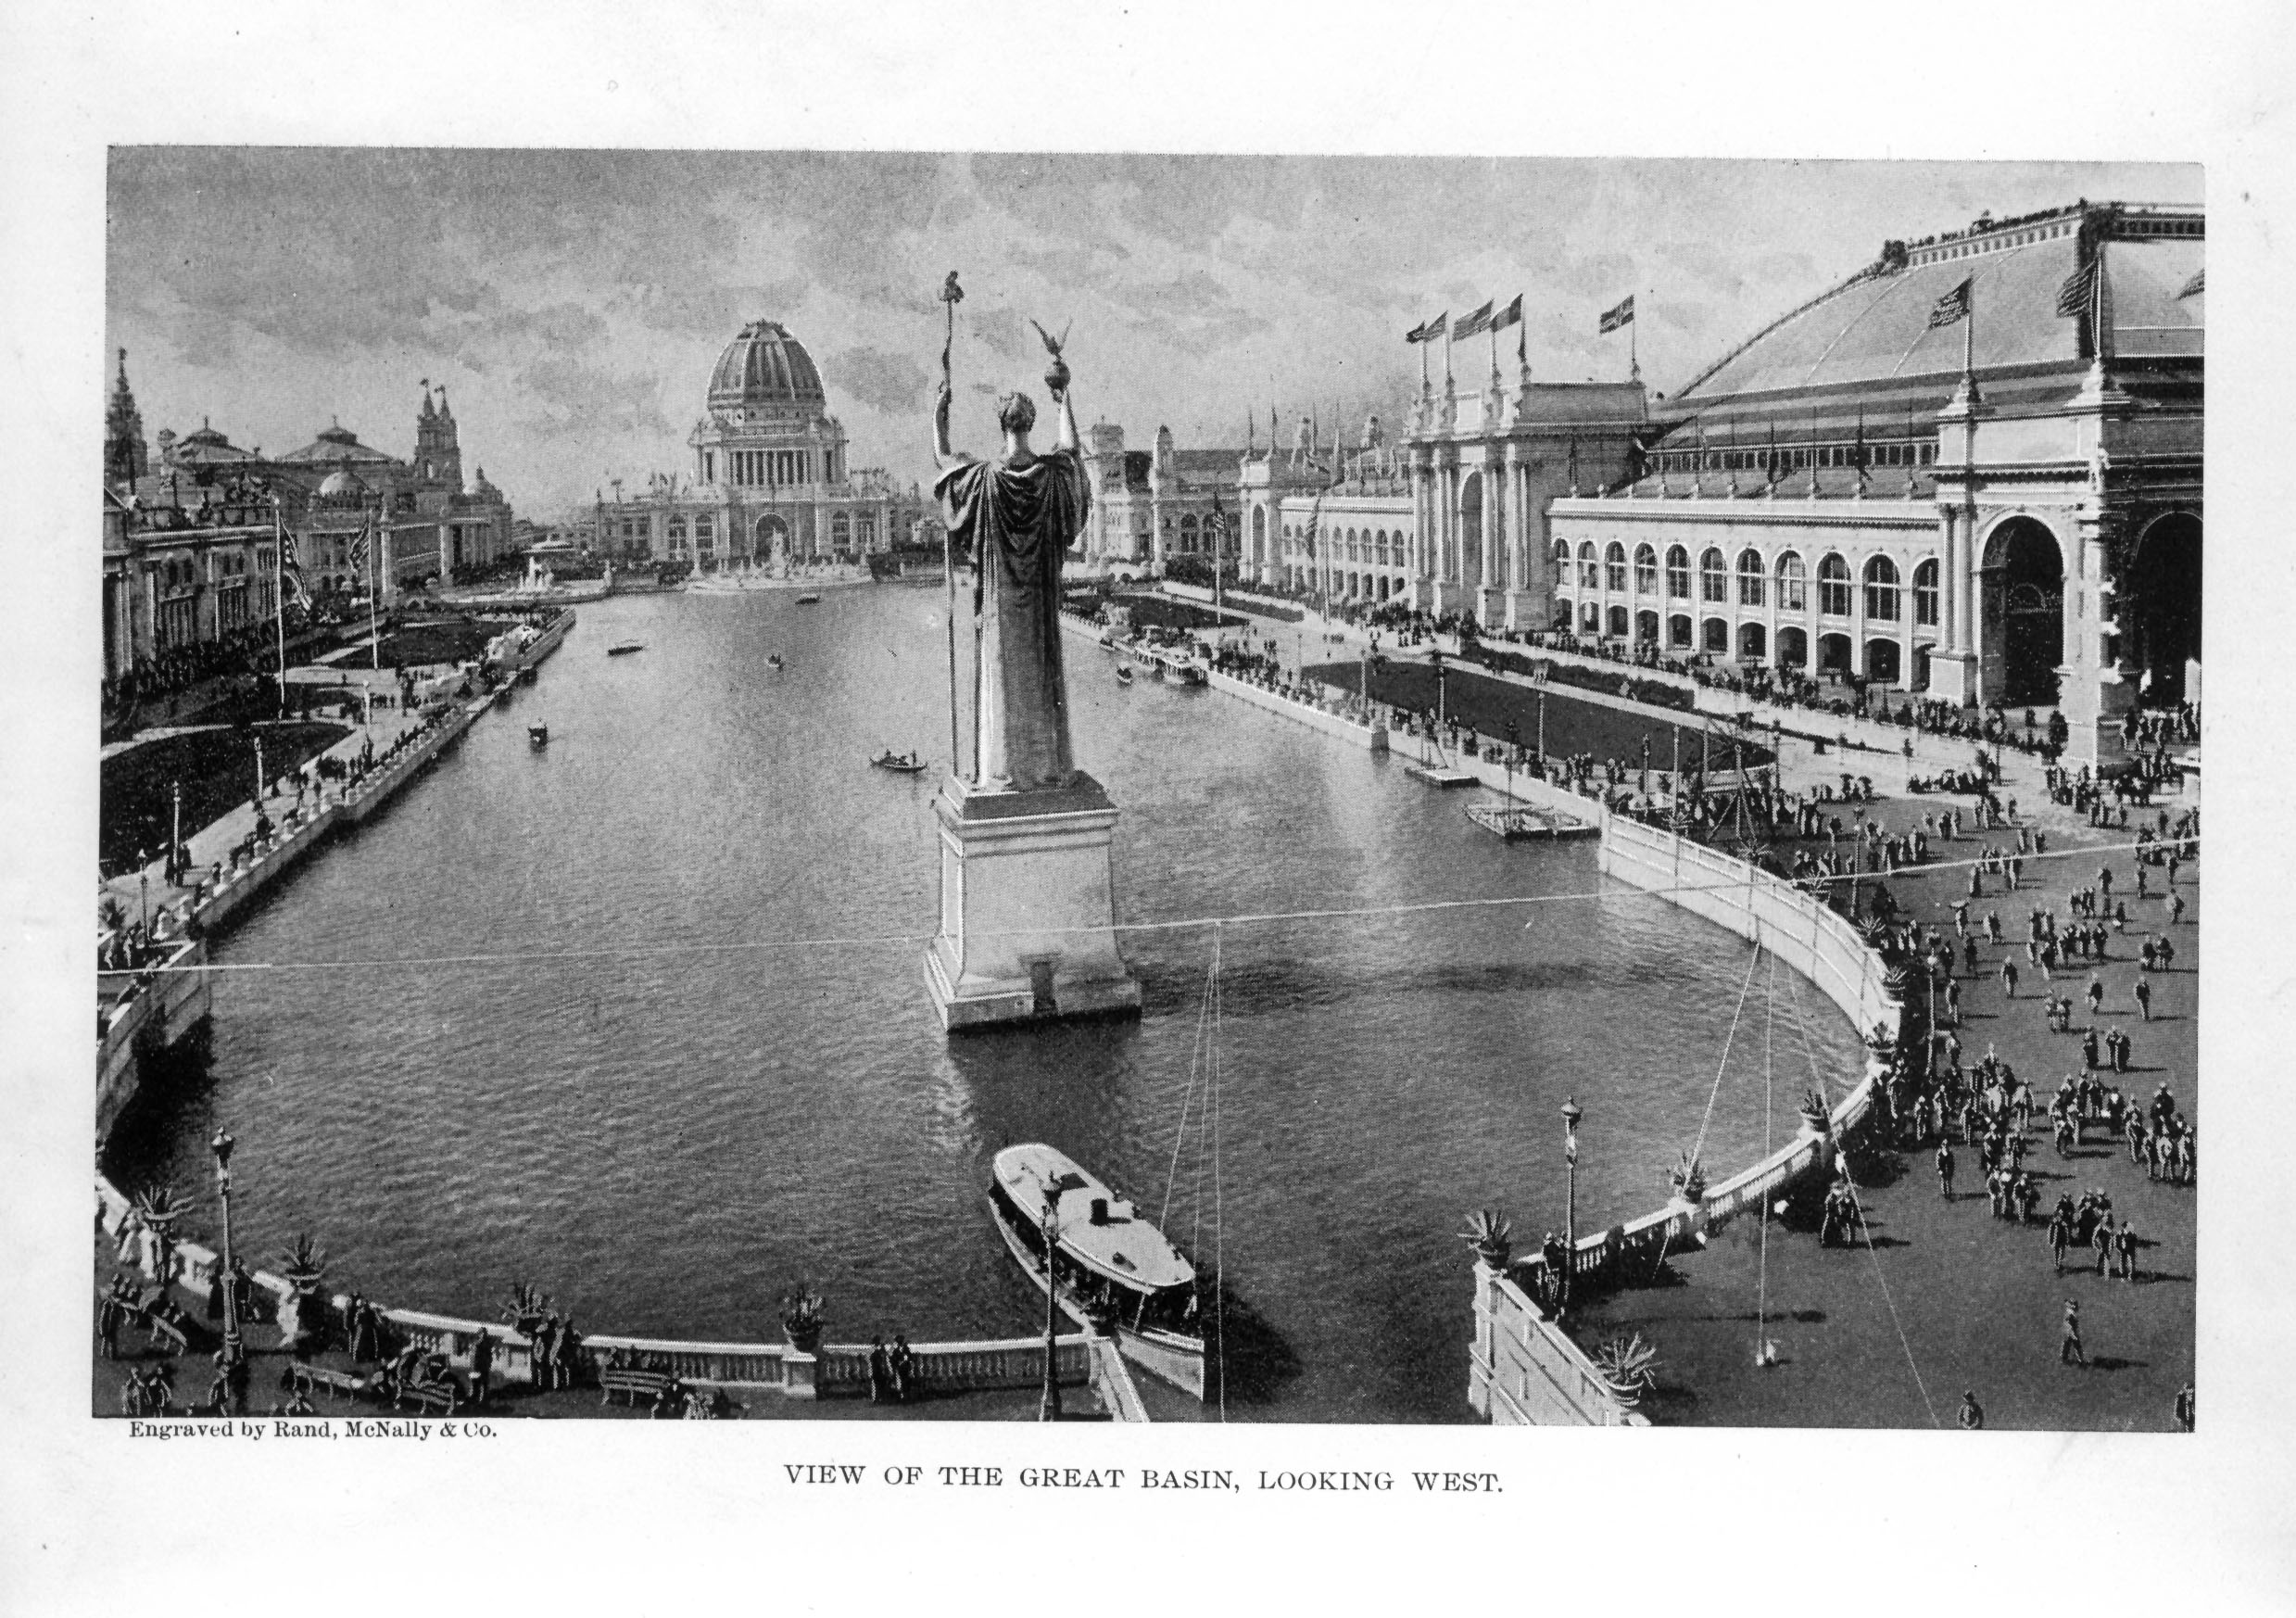 body of water with row boats and monumental statue in middle, surrounded by ornate buildings and bustling crowds